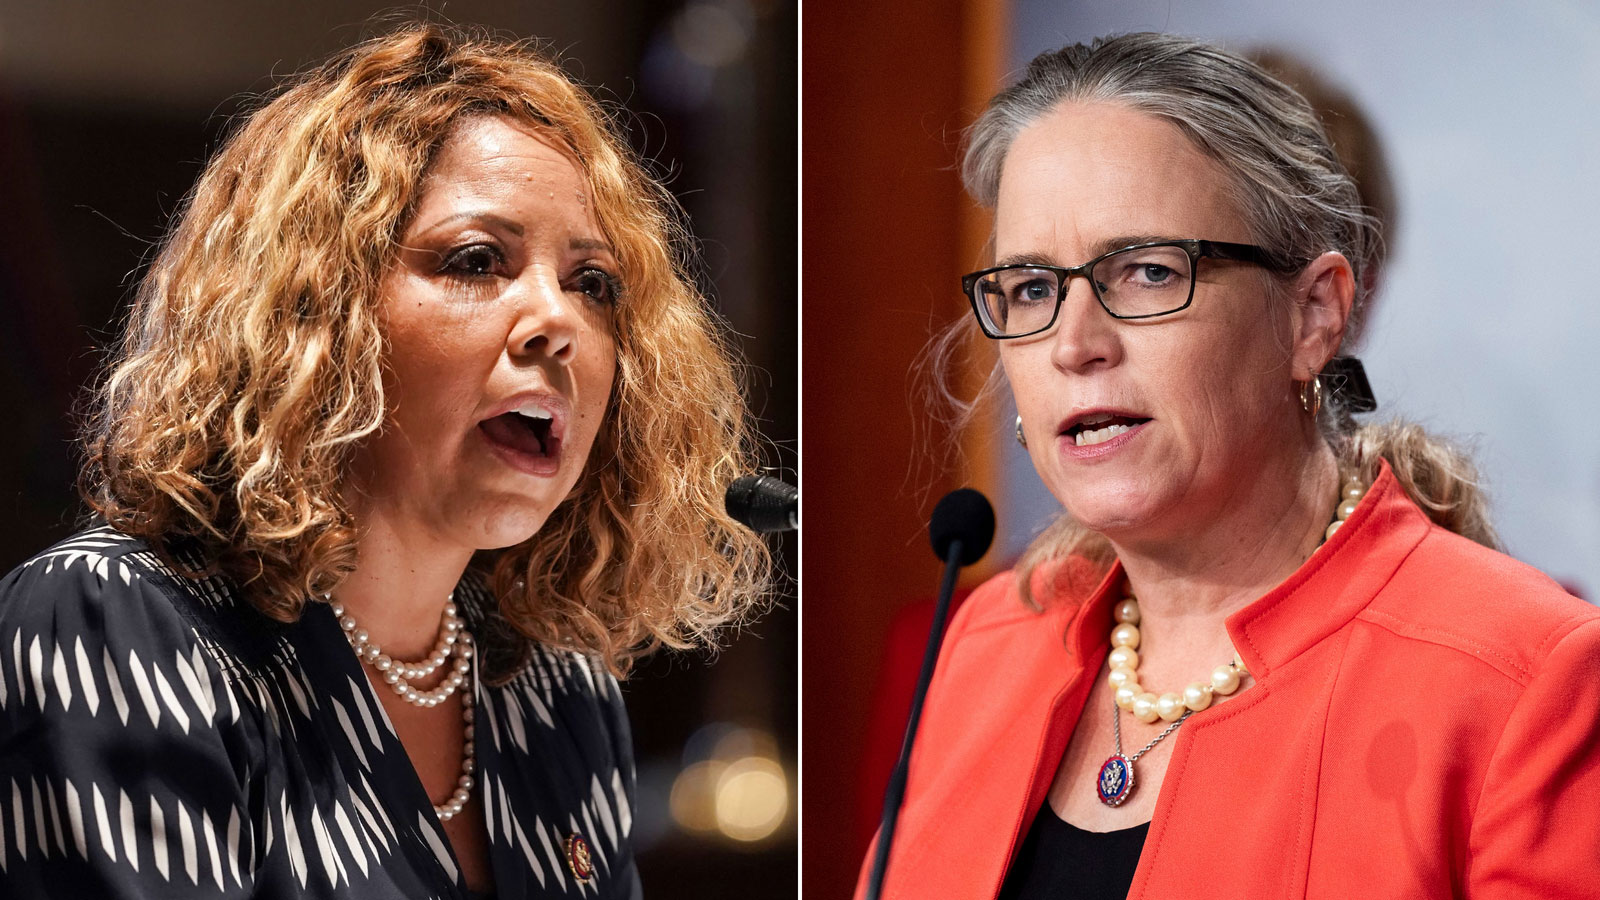 Rep. Lucy McBath, left, and Rep. Carolyn Bourdeaux, right.